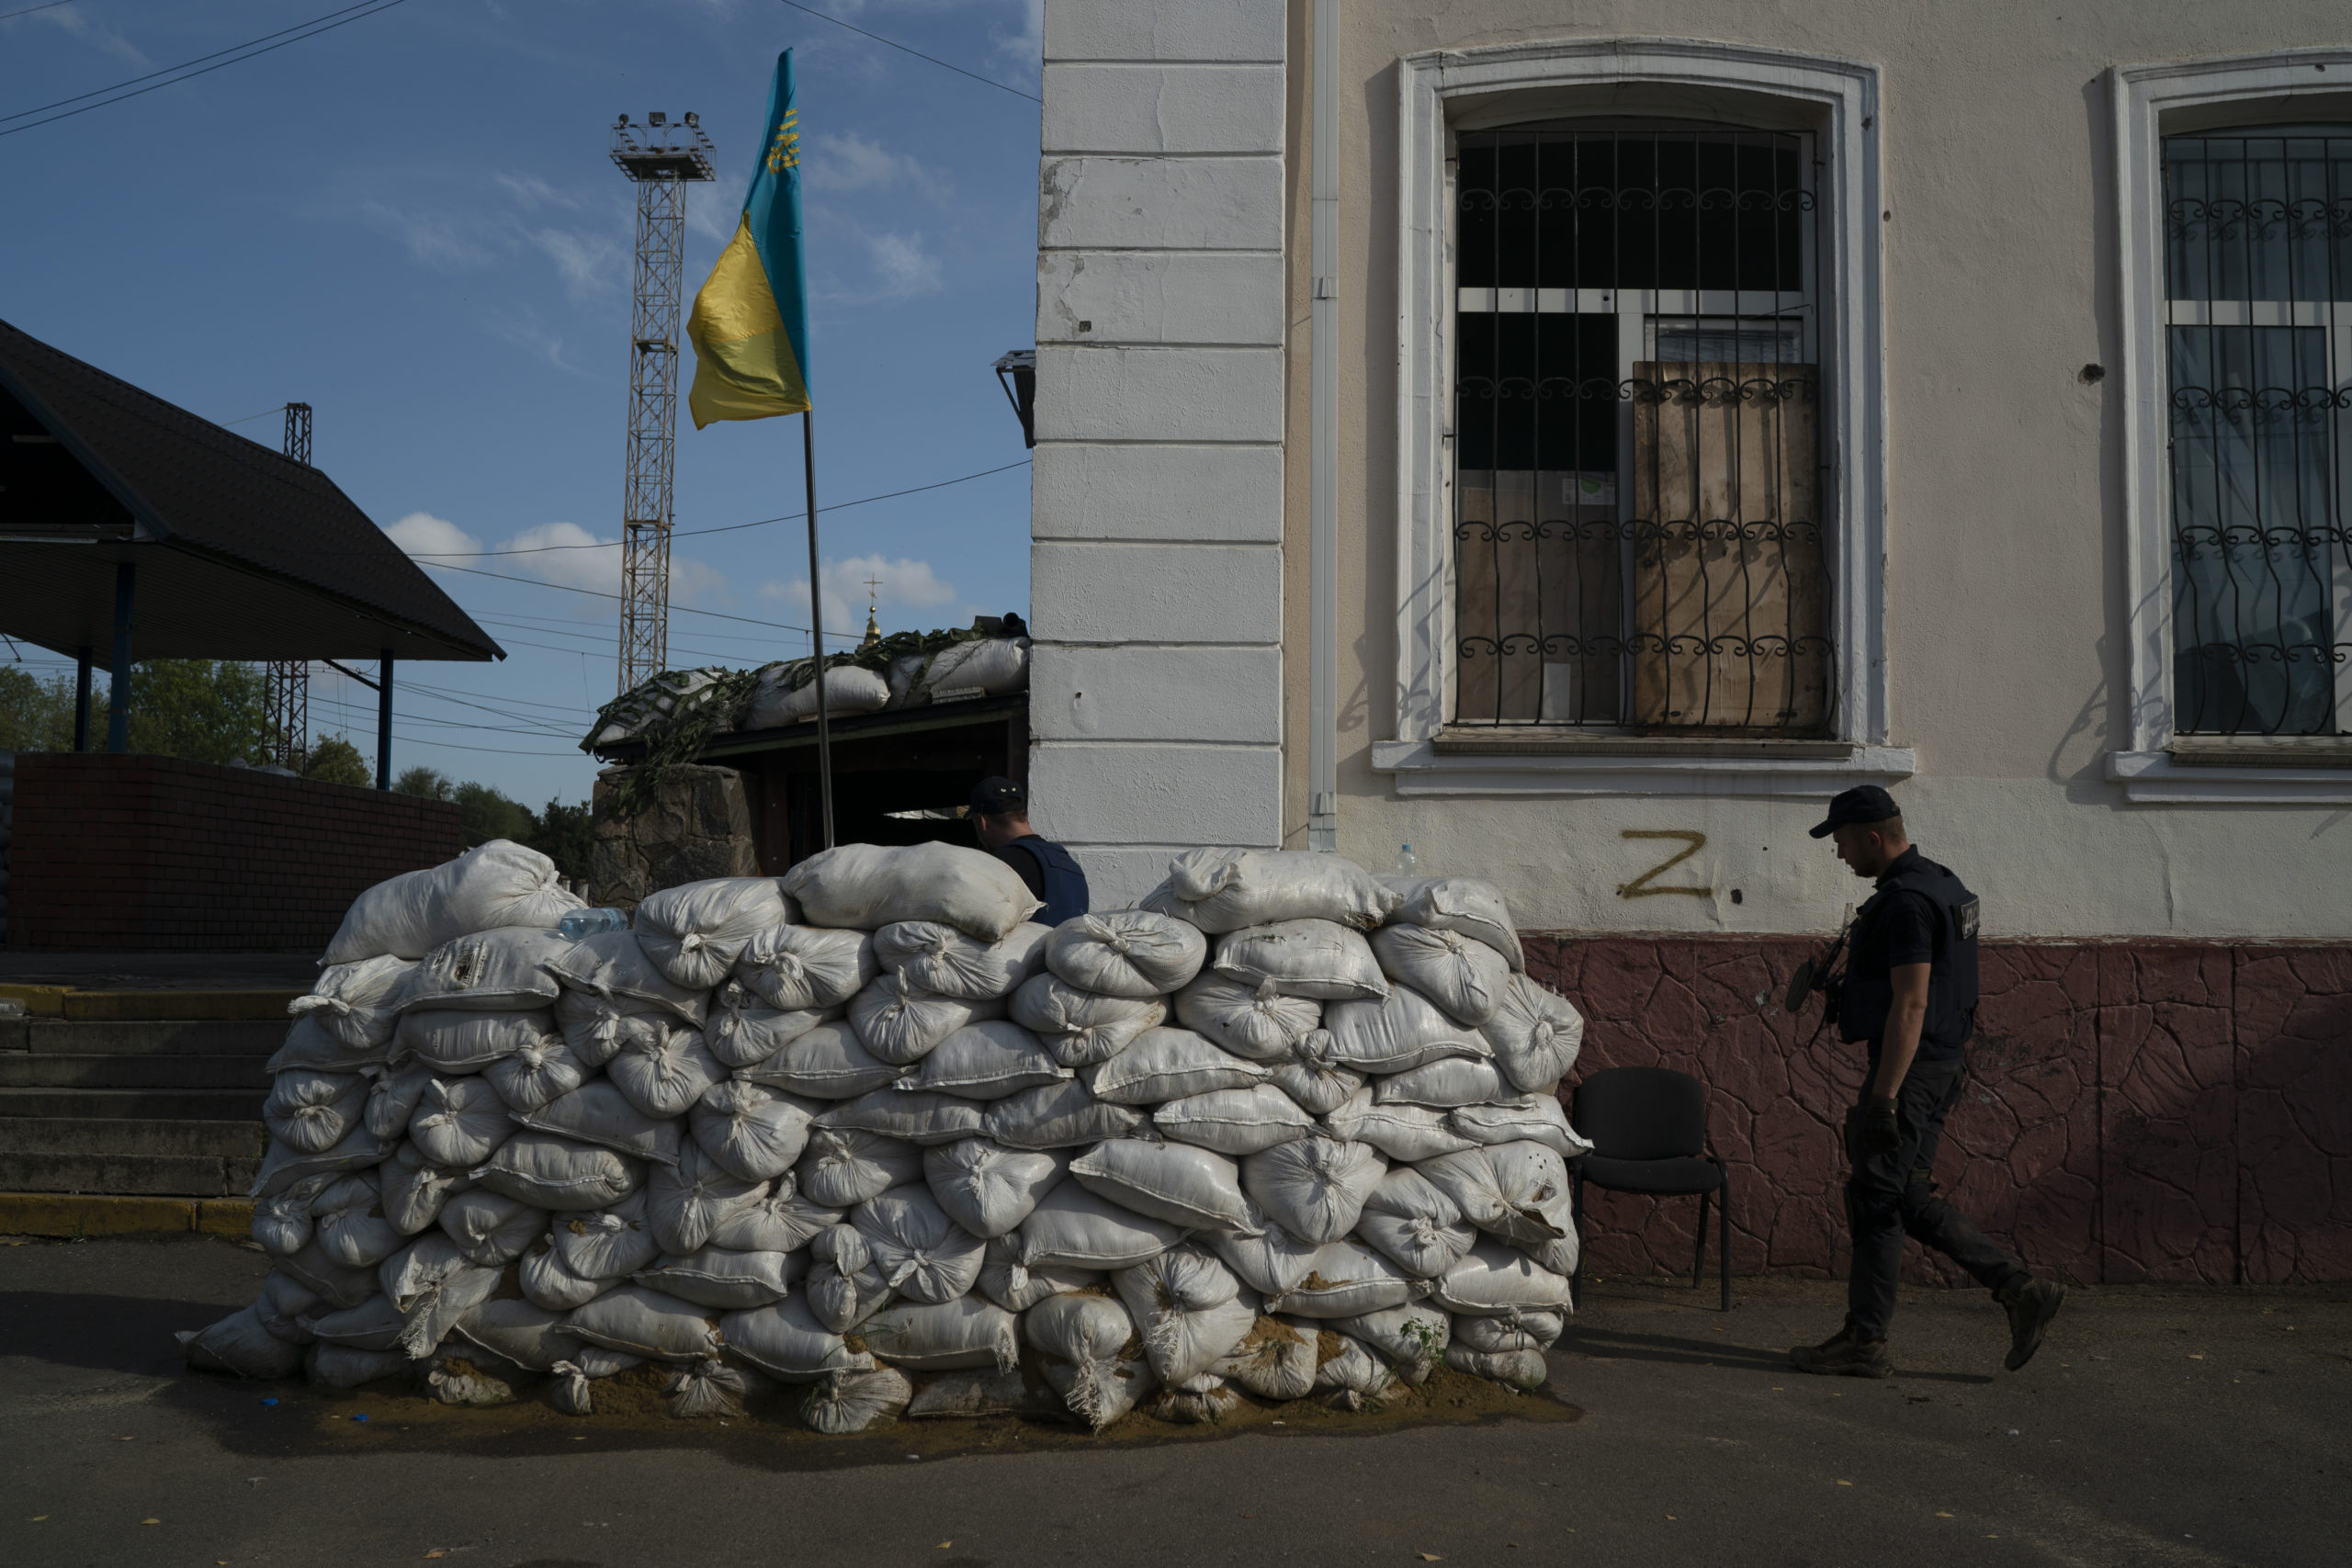 On Sunday, a man with the State of Emergency Service of Ukraine enters the basement of a train station that is fortified with sand bags, which was used as an interrogation room during Russian occupation, in Kozacha Lopan, Ukraine.